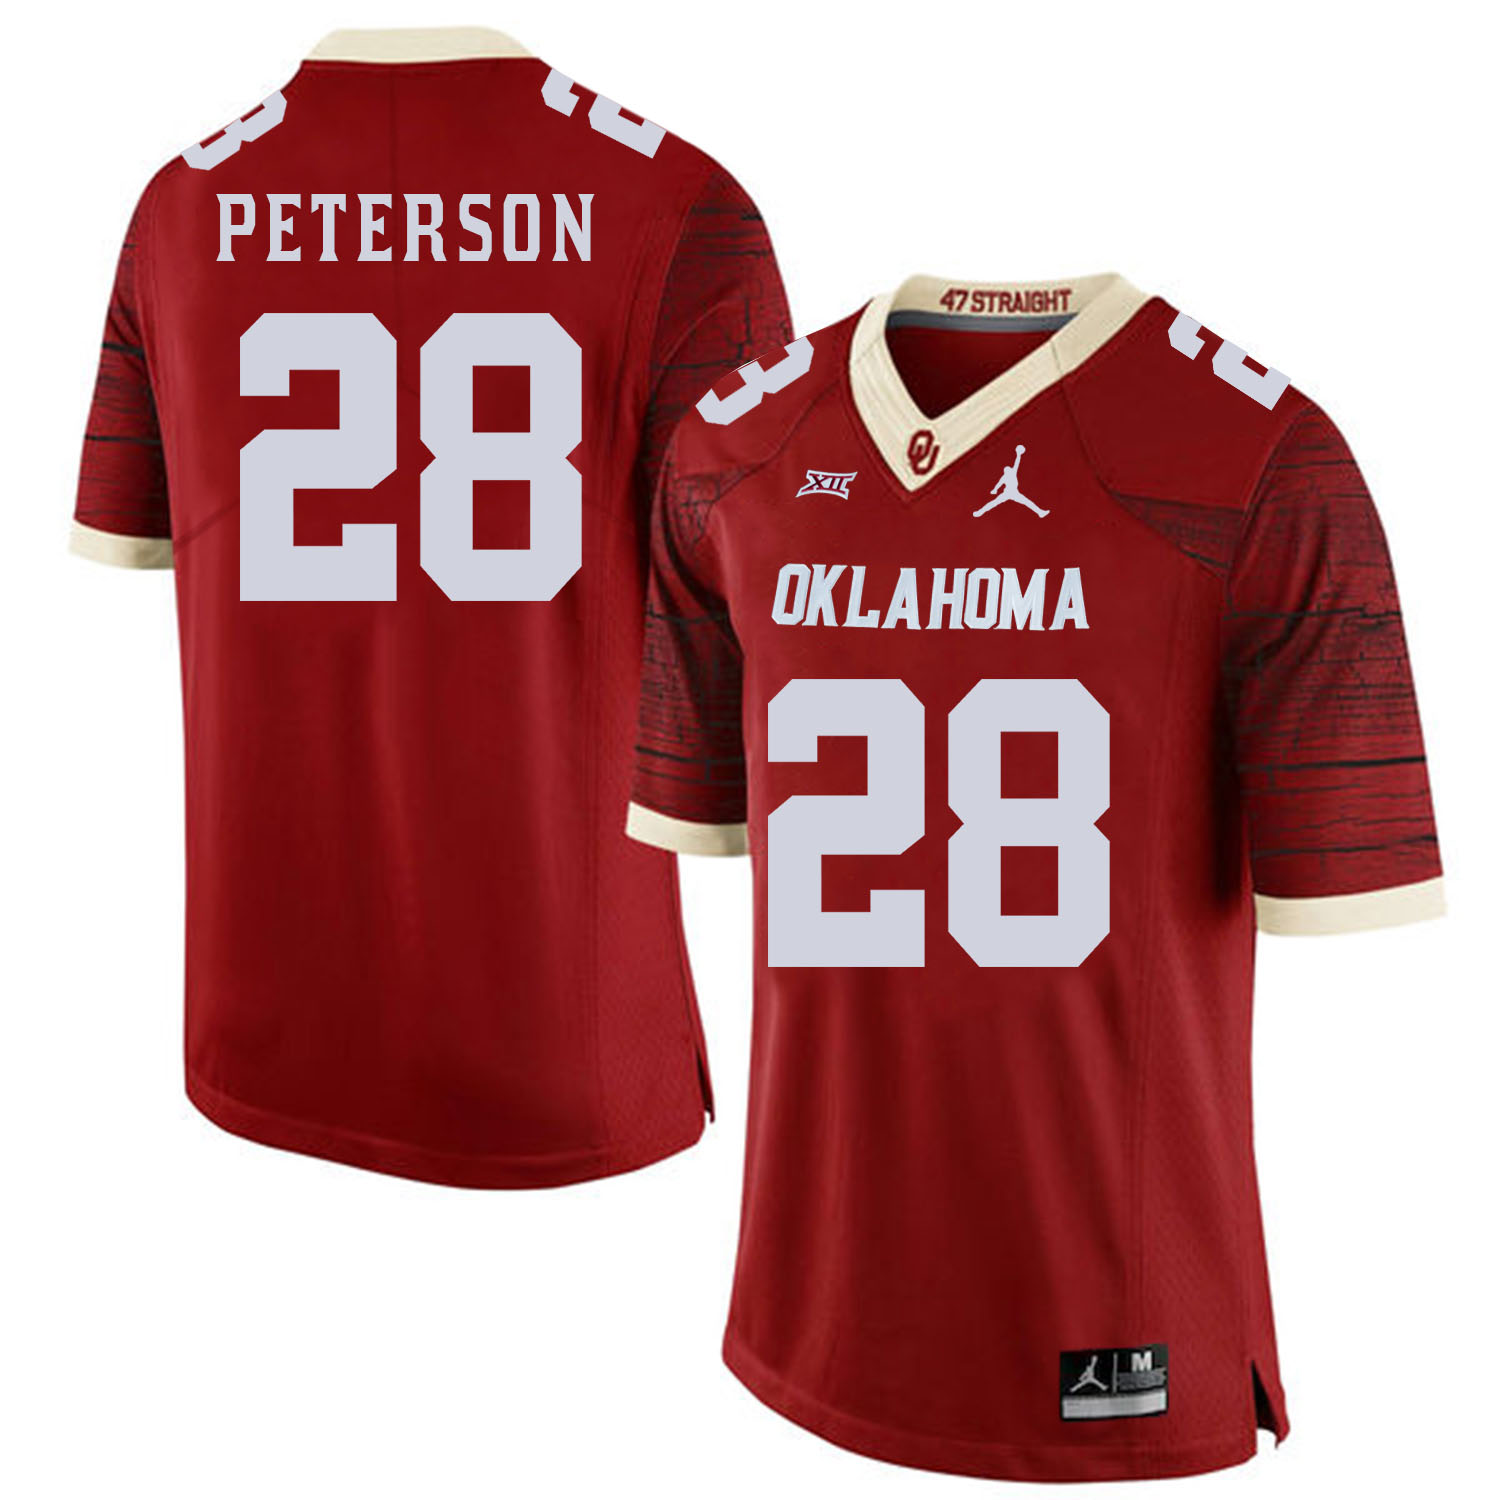 Oklahoma Sooners 28 Adrian Peterson Red 47 Game Winning Streak College Football Jersey - Click Image to Close